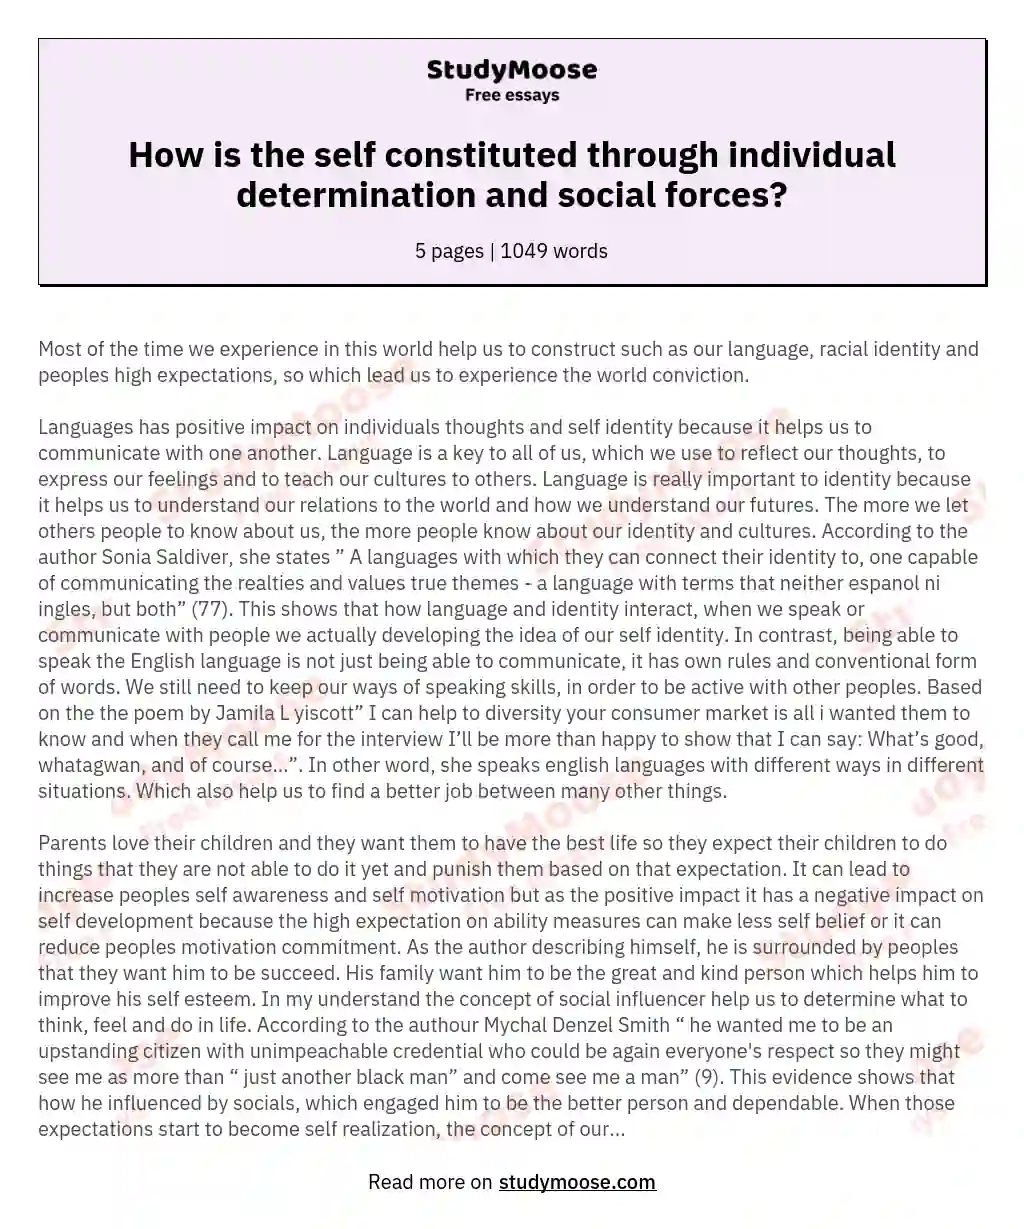 How is the self constituted through individual determination and social forces? essay